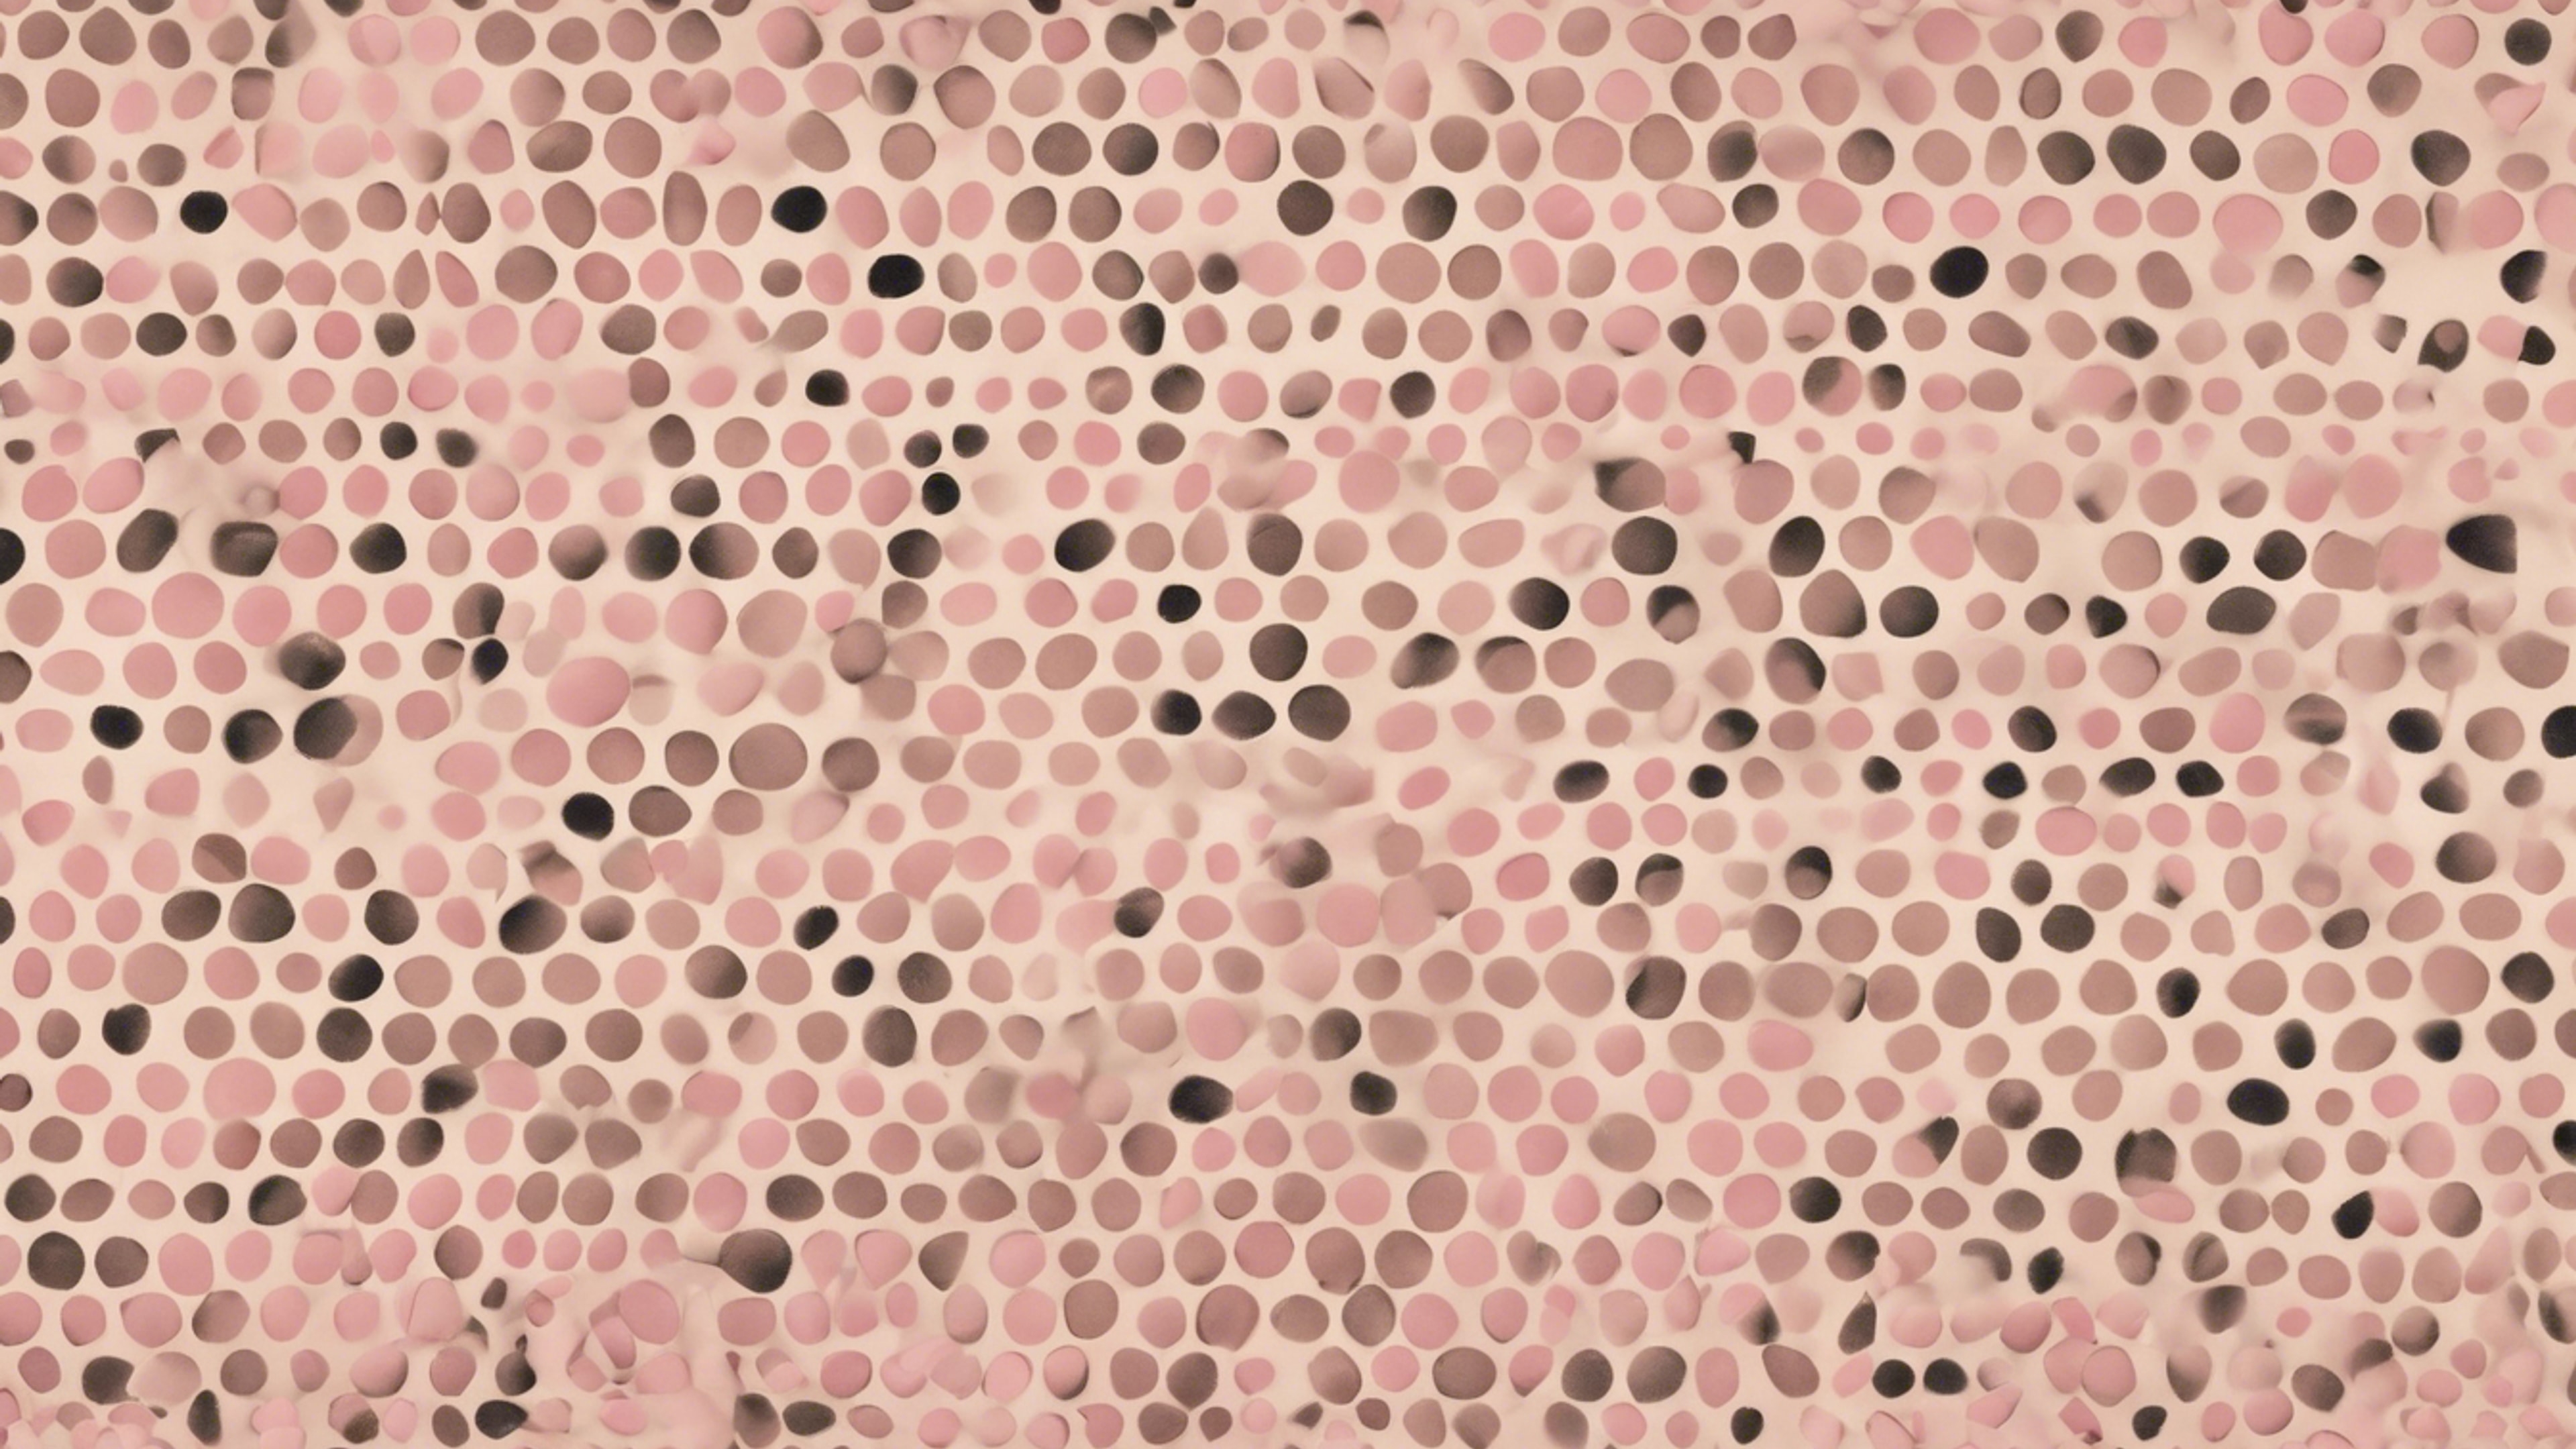 A polka dot pattern consisting of small, pastel pink dots on a cream background Wallpaper[ffe38e7b3ae543588364]